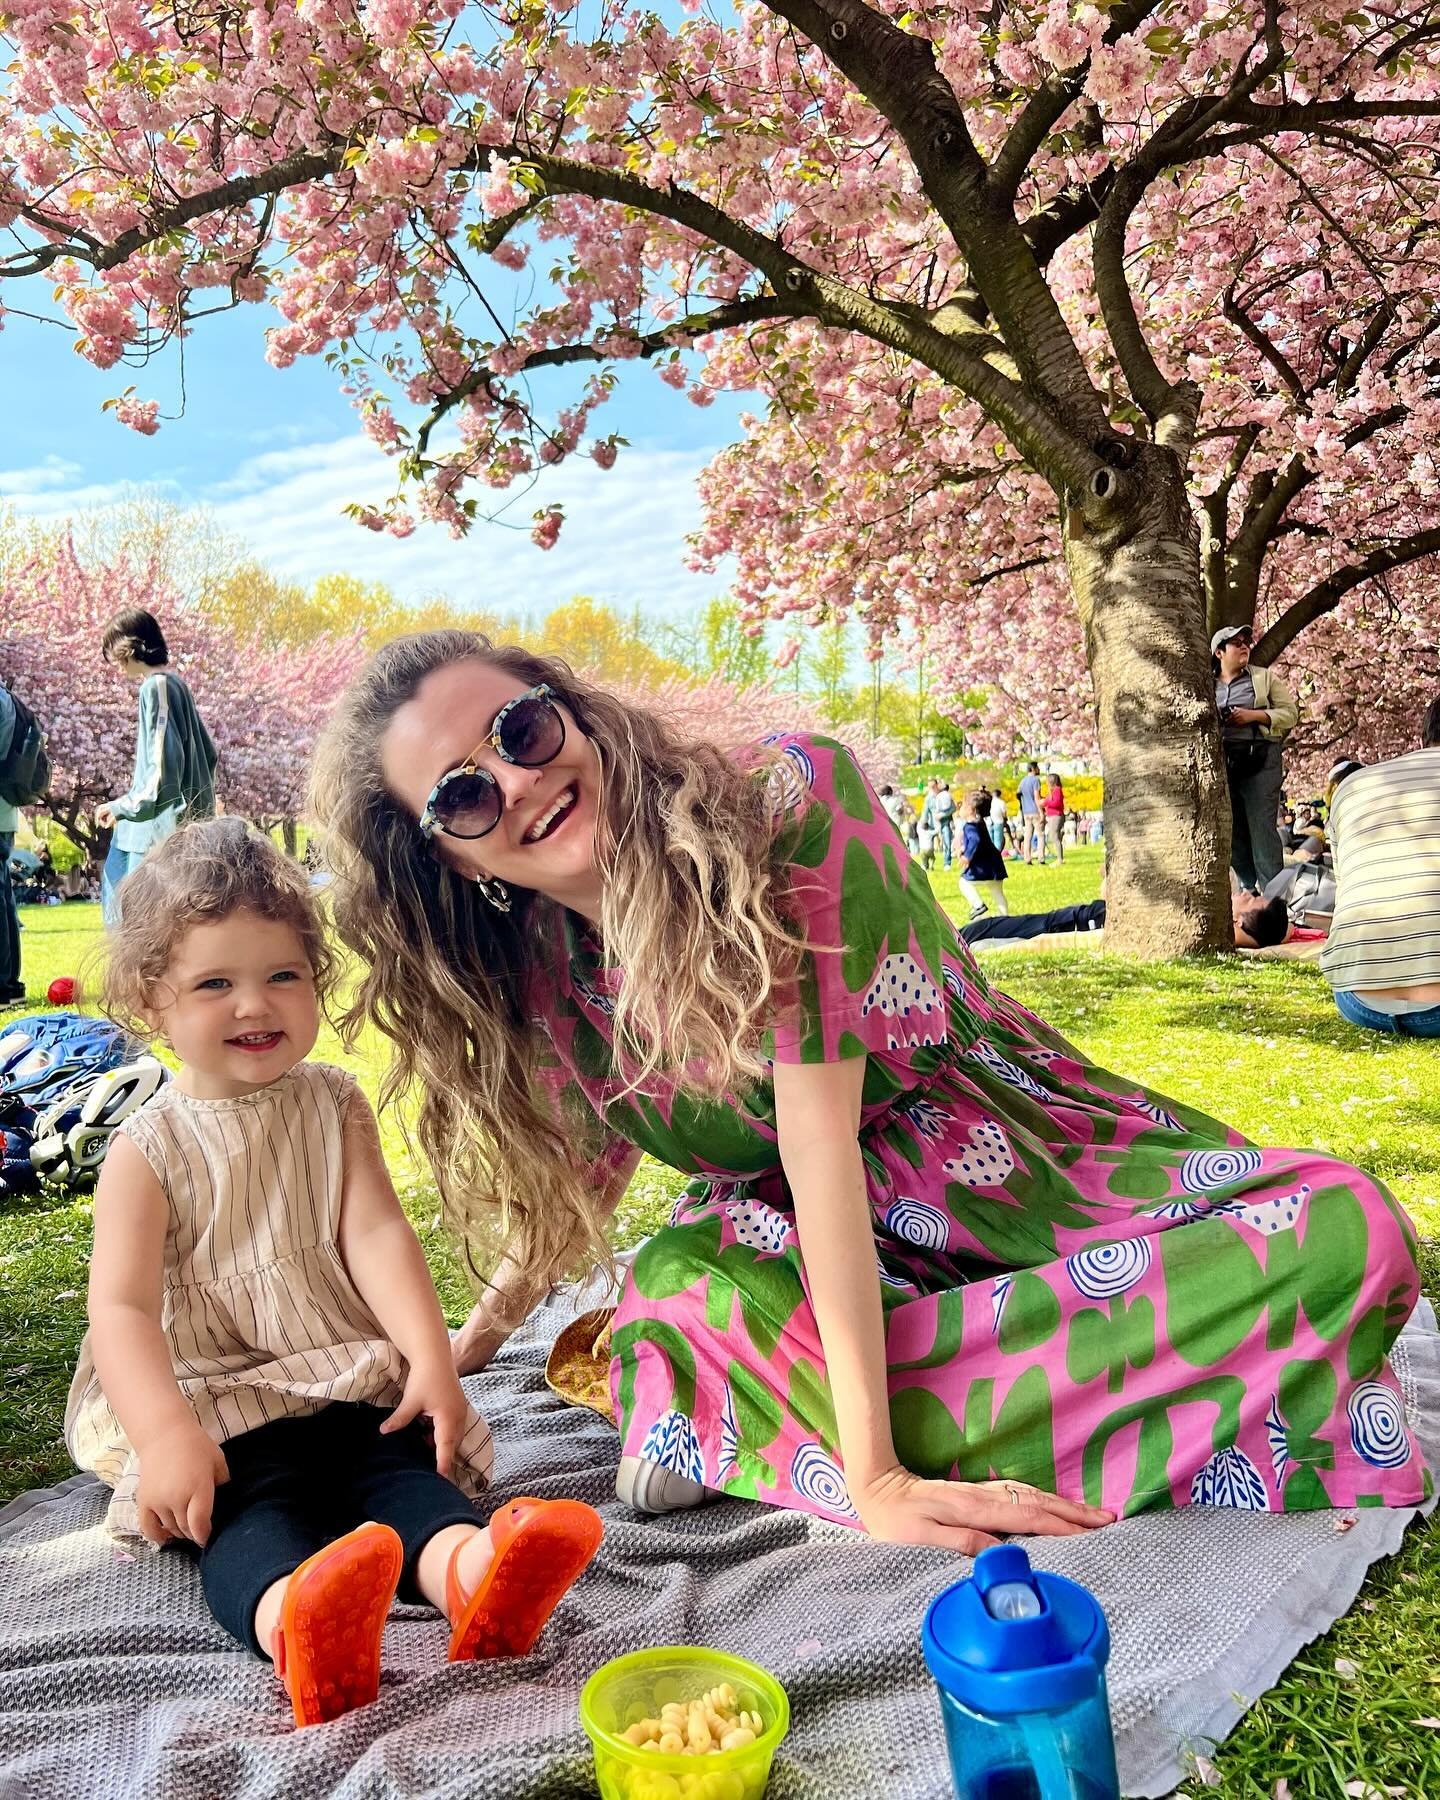 🌸Sweet days with best babes and Brooklyn blossoms 🌸